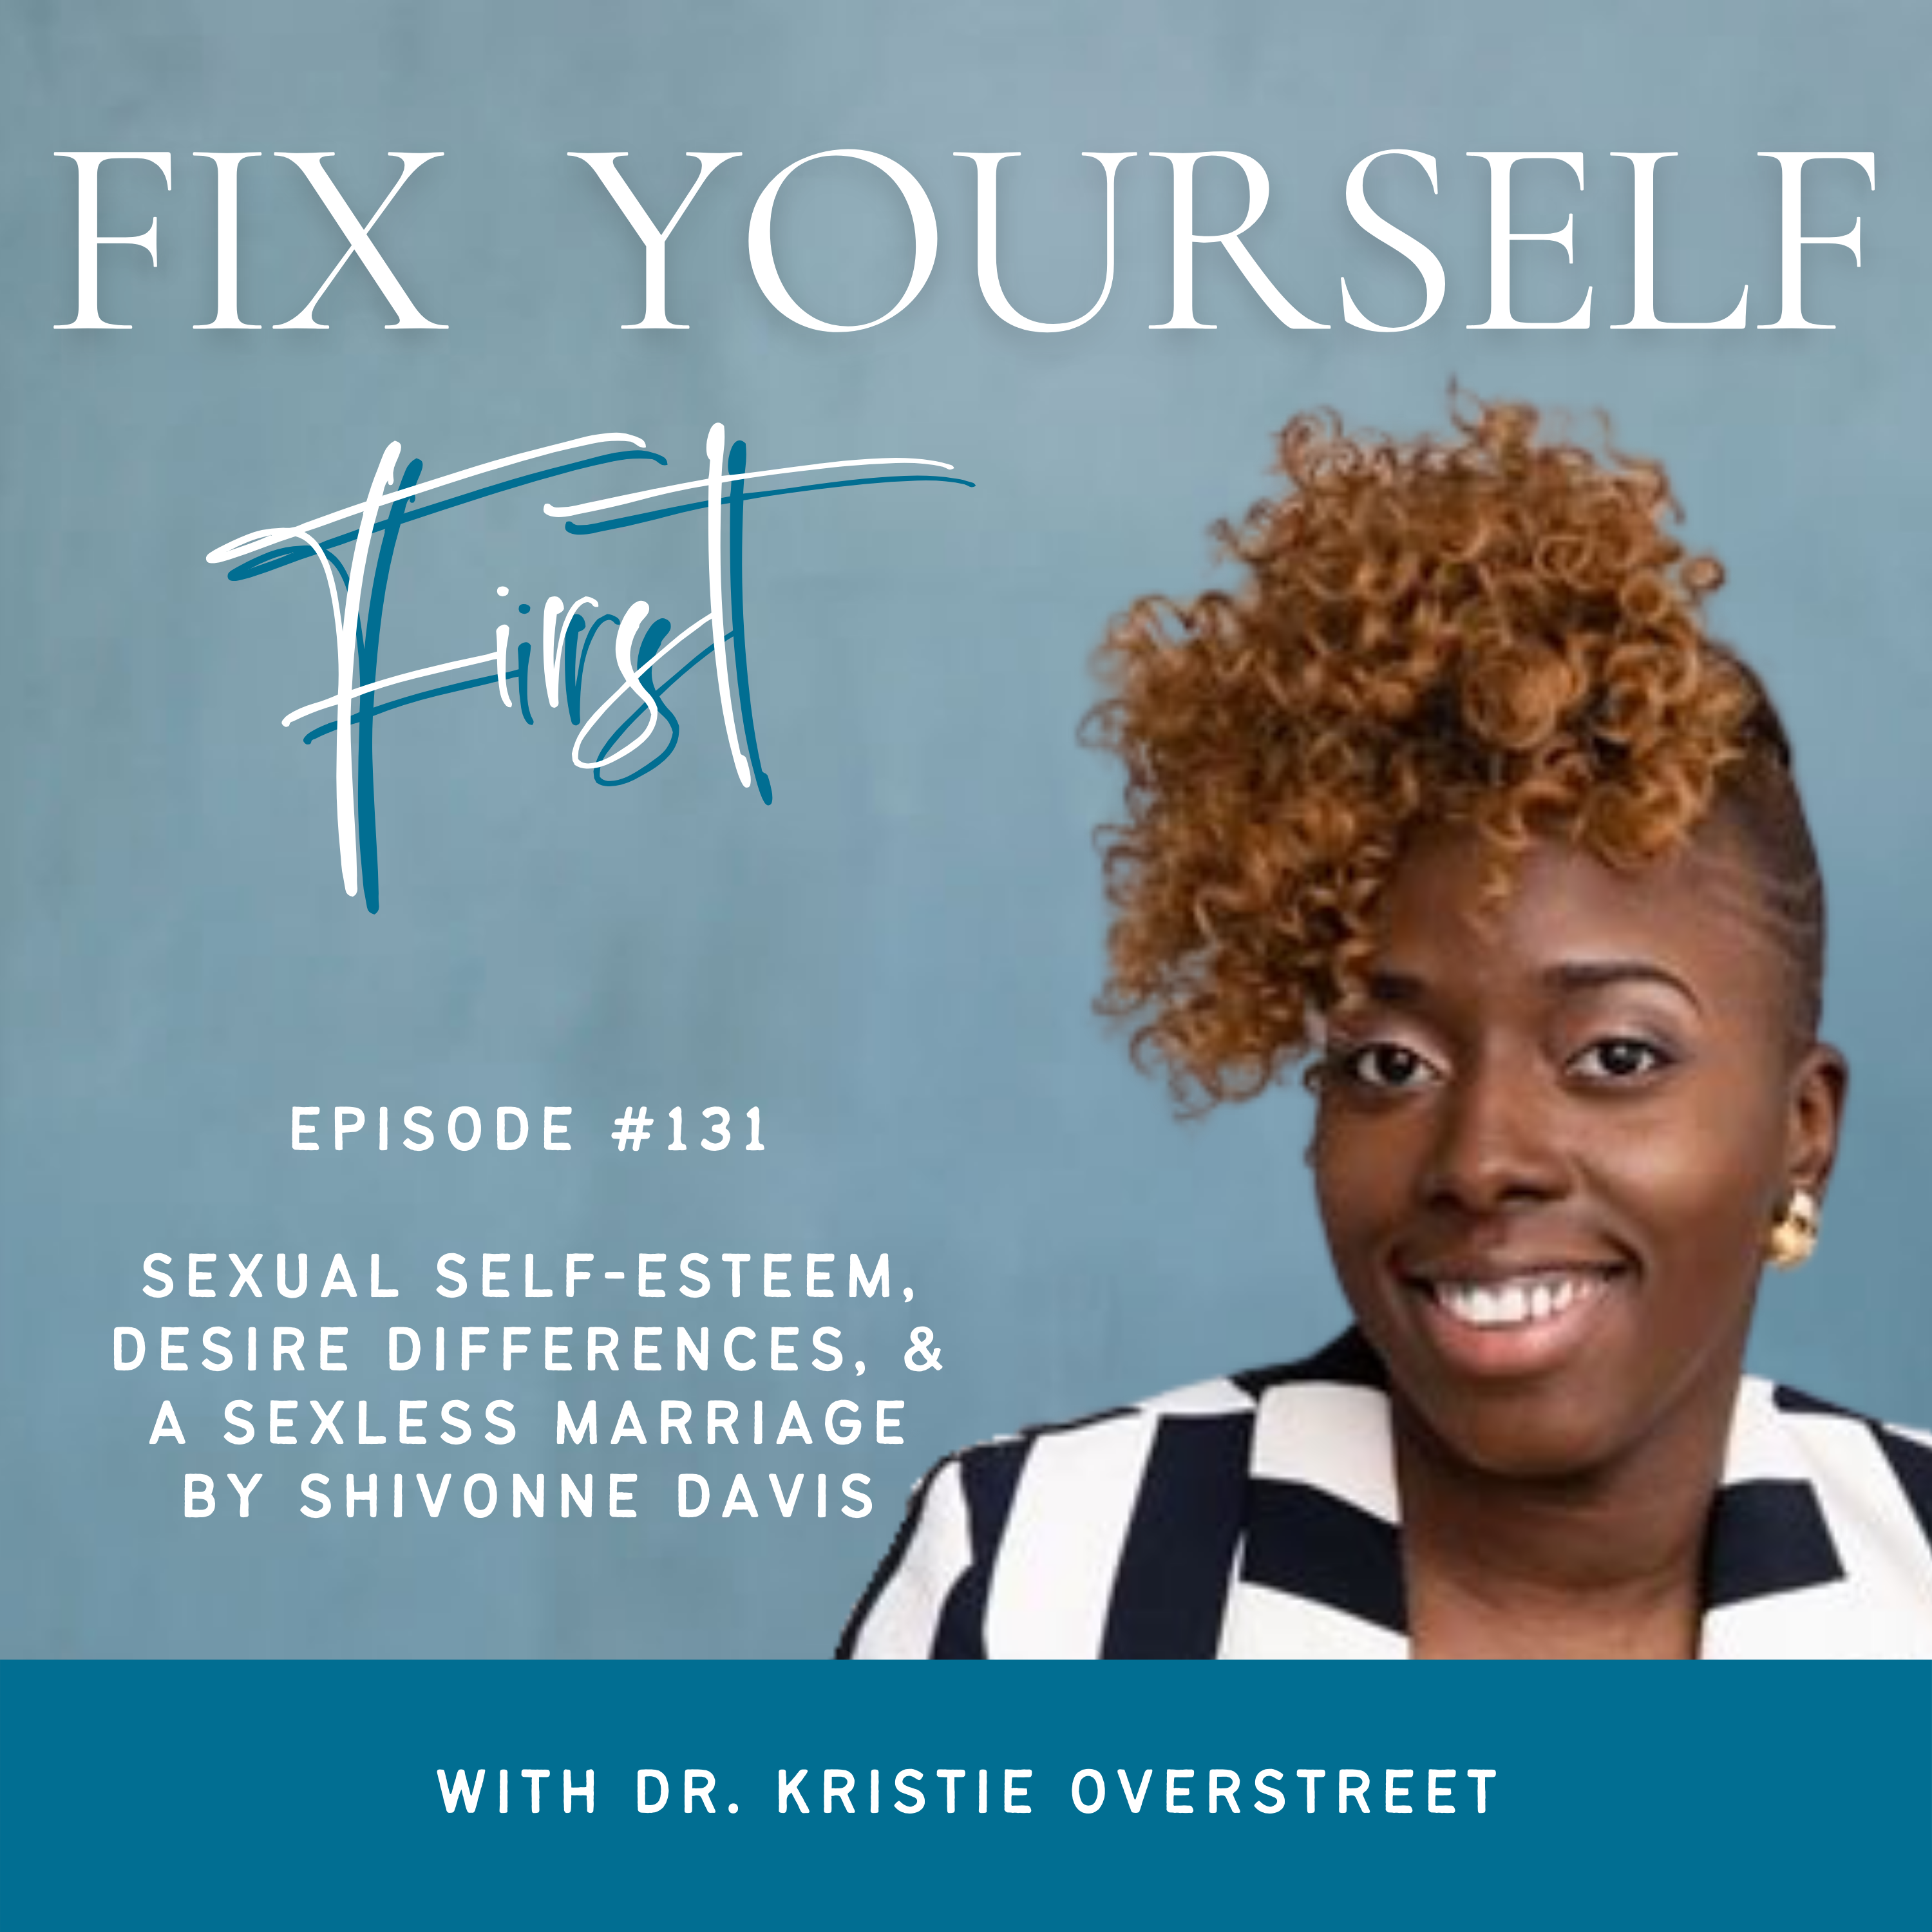 Fix Yourself First Episode 131 Sexual Self-Esteem, Desire Differences, & A Sexless Marriage by Shivonne Davis